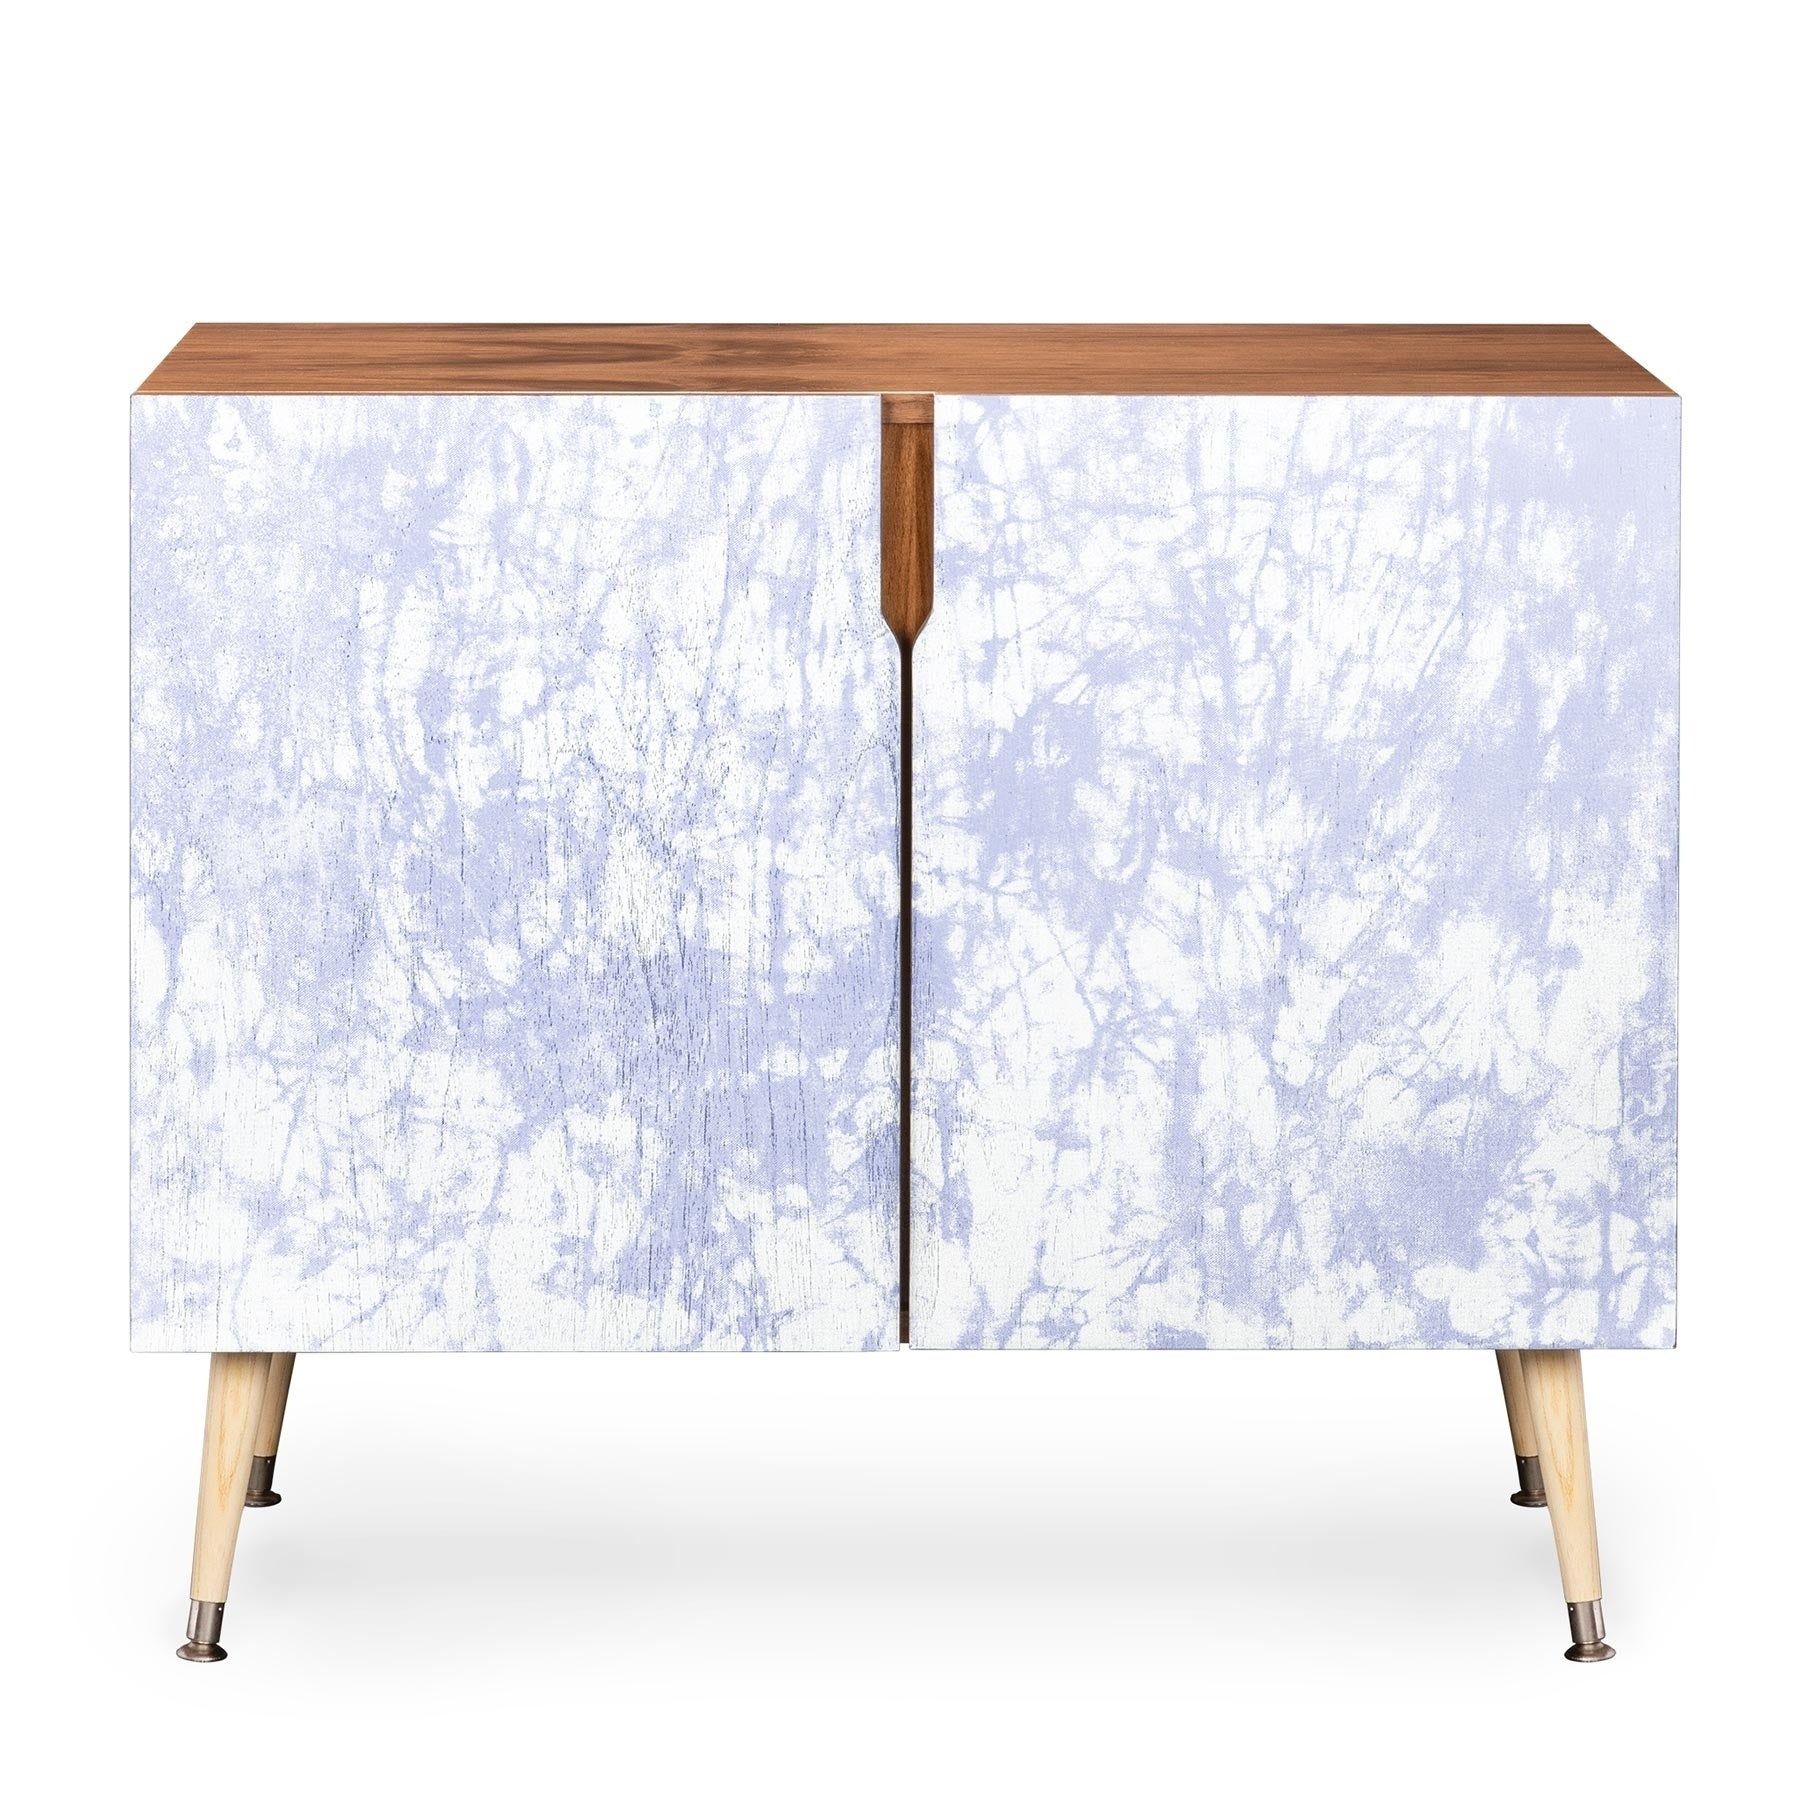 Deny Designs Amy Sia Pale Blue Crackle Batik Credenza Pertaining To Symmetric Blue Swirl Credenzas (View 8 of 30)